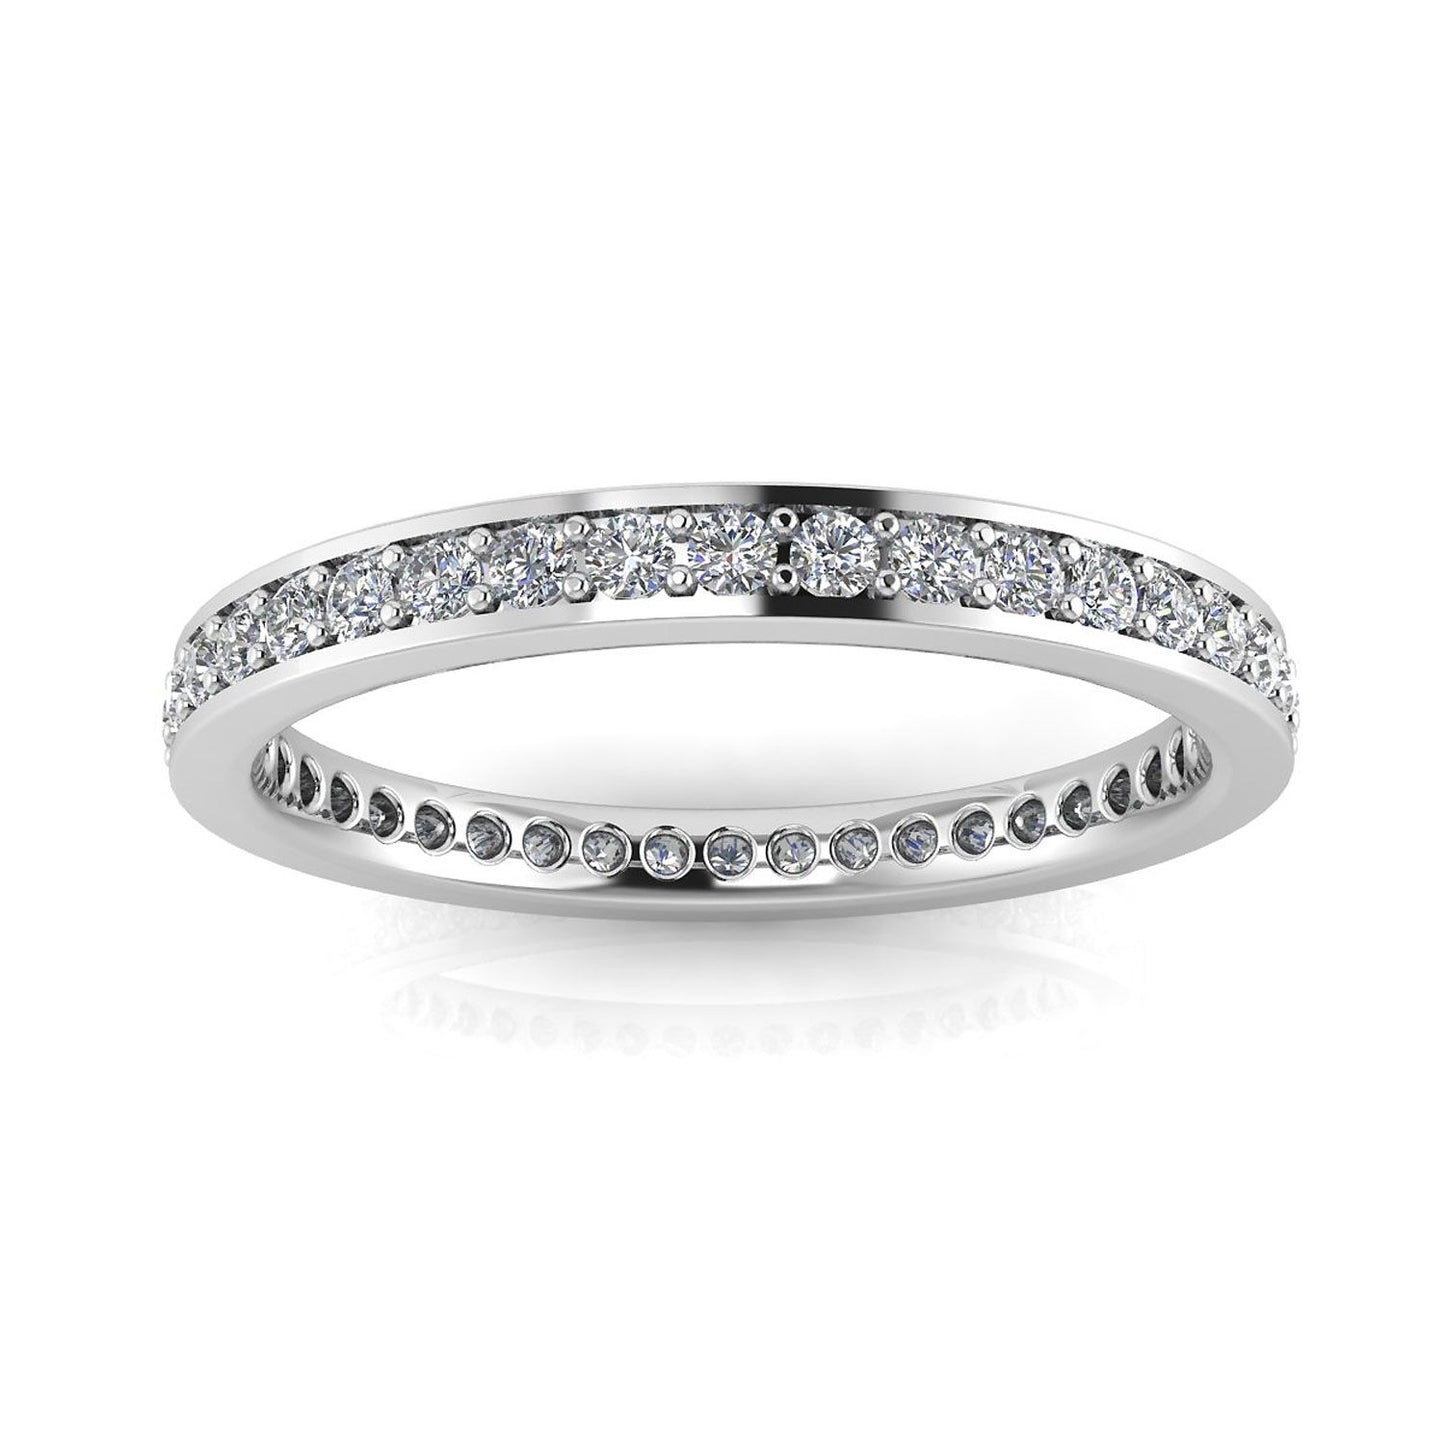 Round Brilliant Cut Diamond Channel Pave Set Eternity Ring In 14k White Gold  (0.43ct. Tw.) Ring Size 4